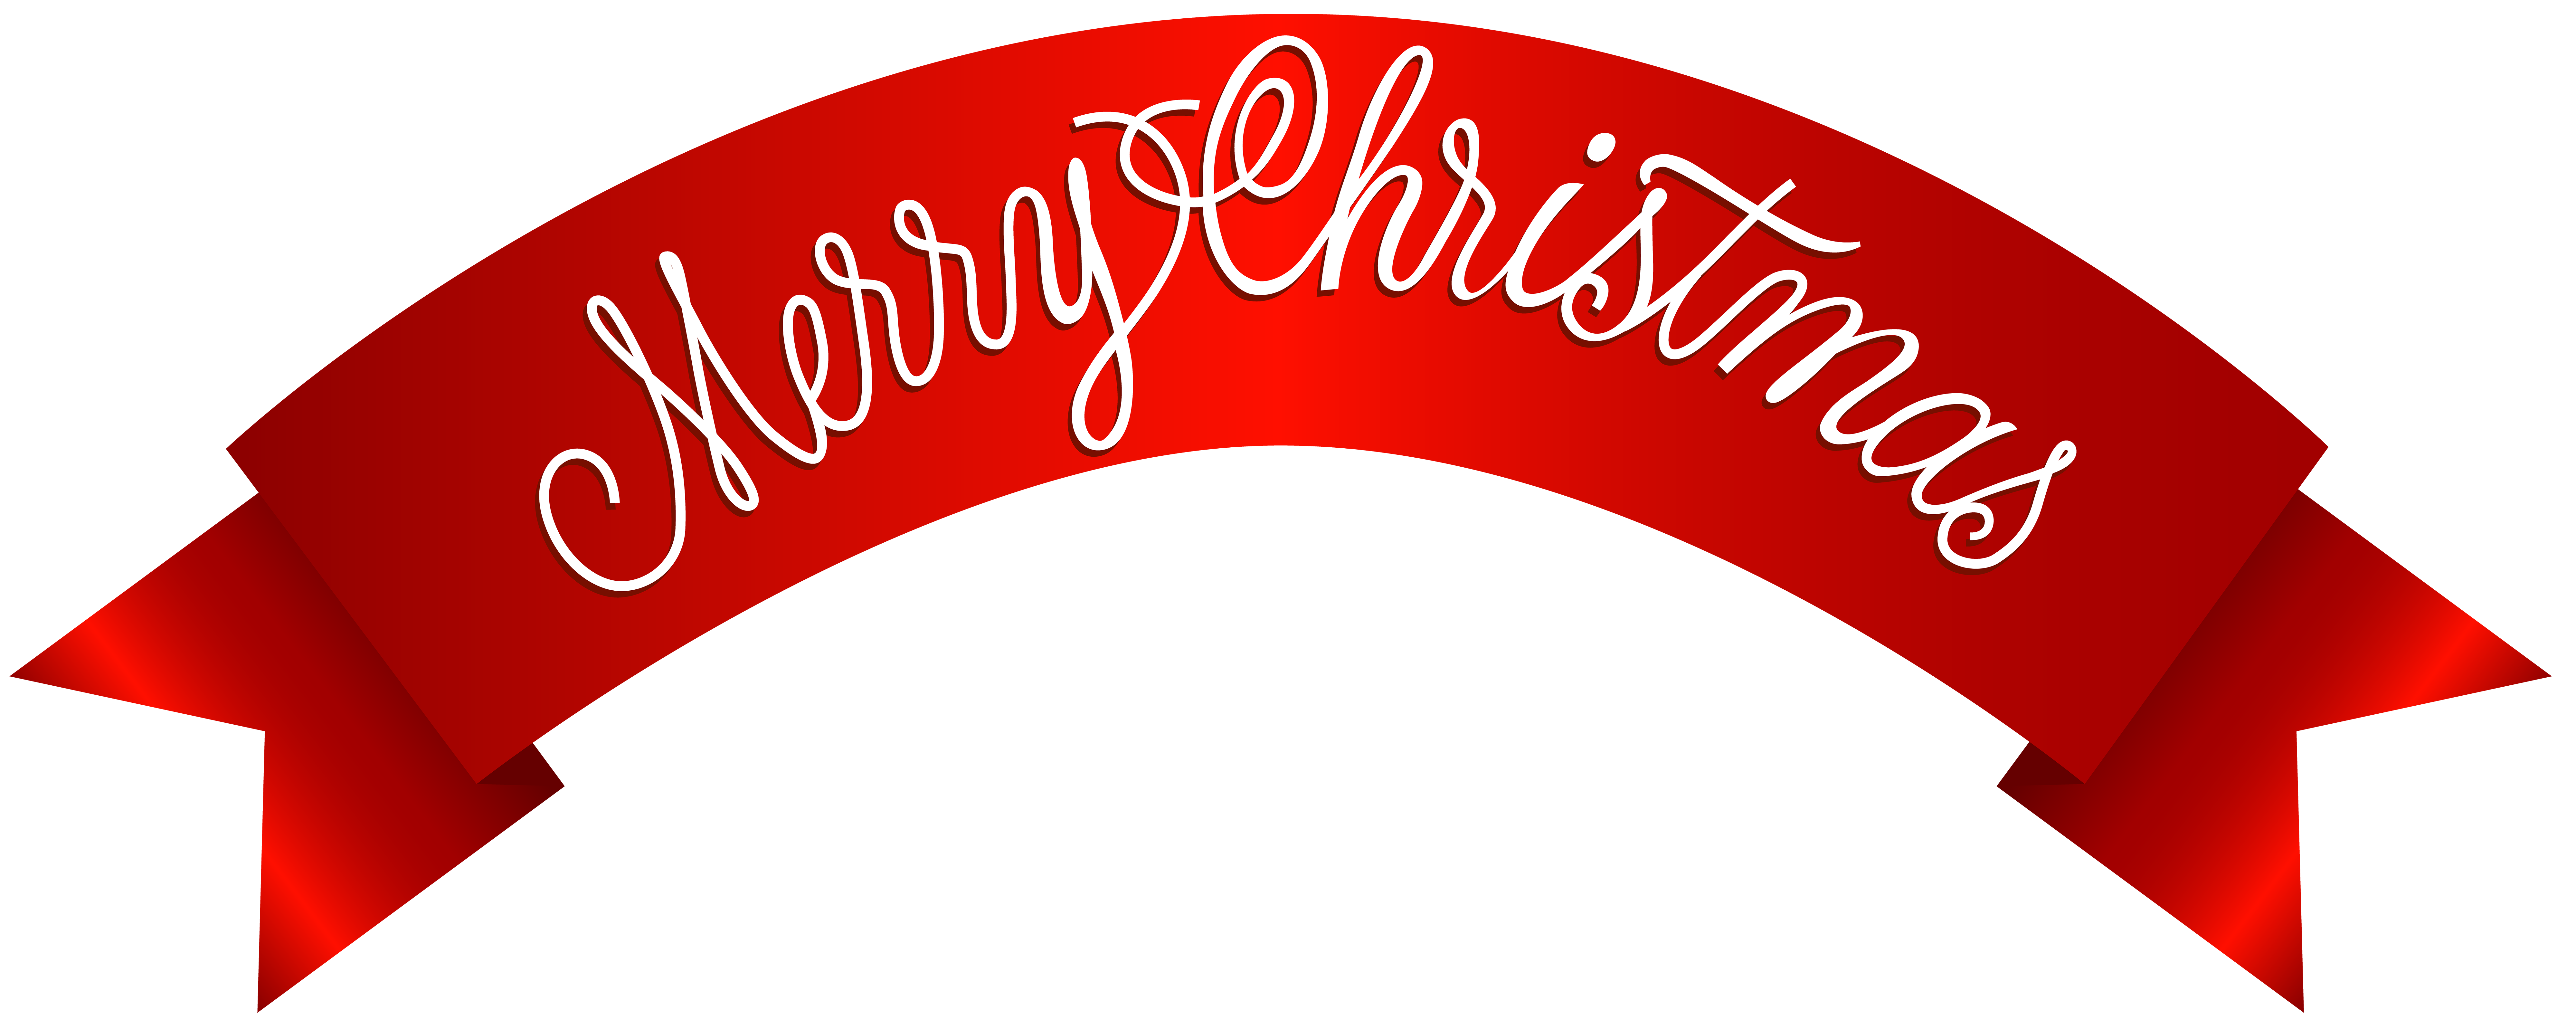 merry-christmas-banner-png-clip-art-image-gallery-yopriceville-high